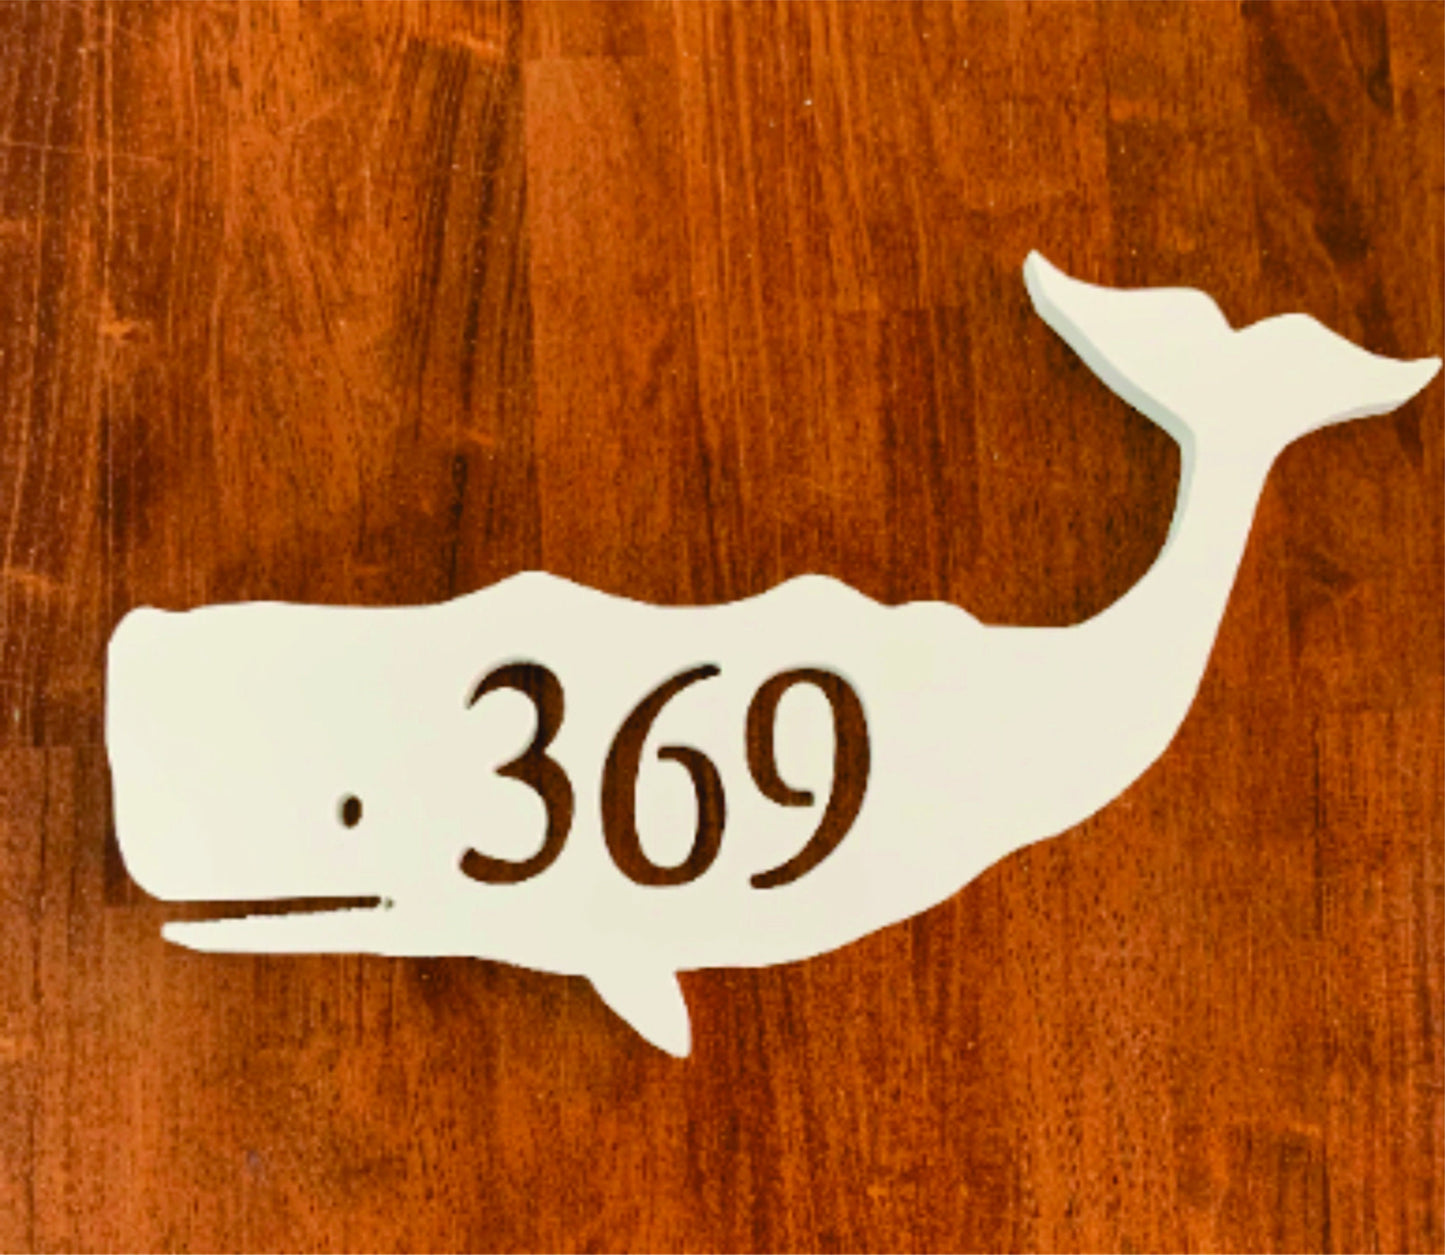 House Number Plaque - Whale, Address Plaque, Custom, Personalized, Housewarming Gift, Tropical, Outdoor Decor, Ships Free To Mainland USA